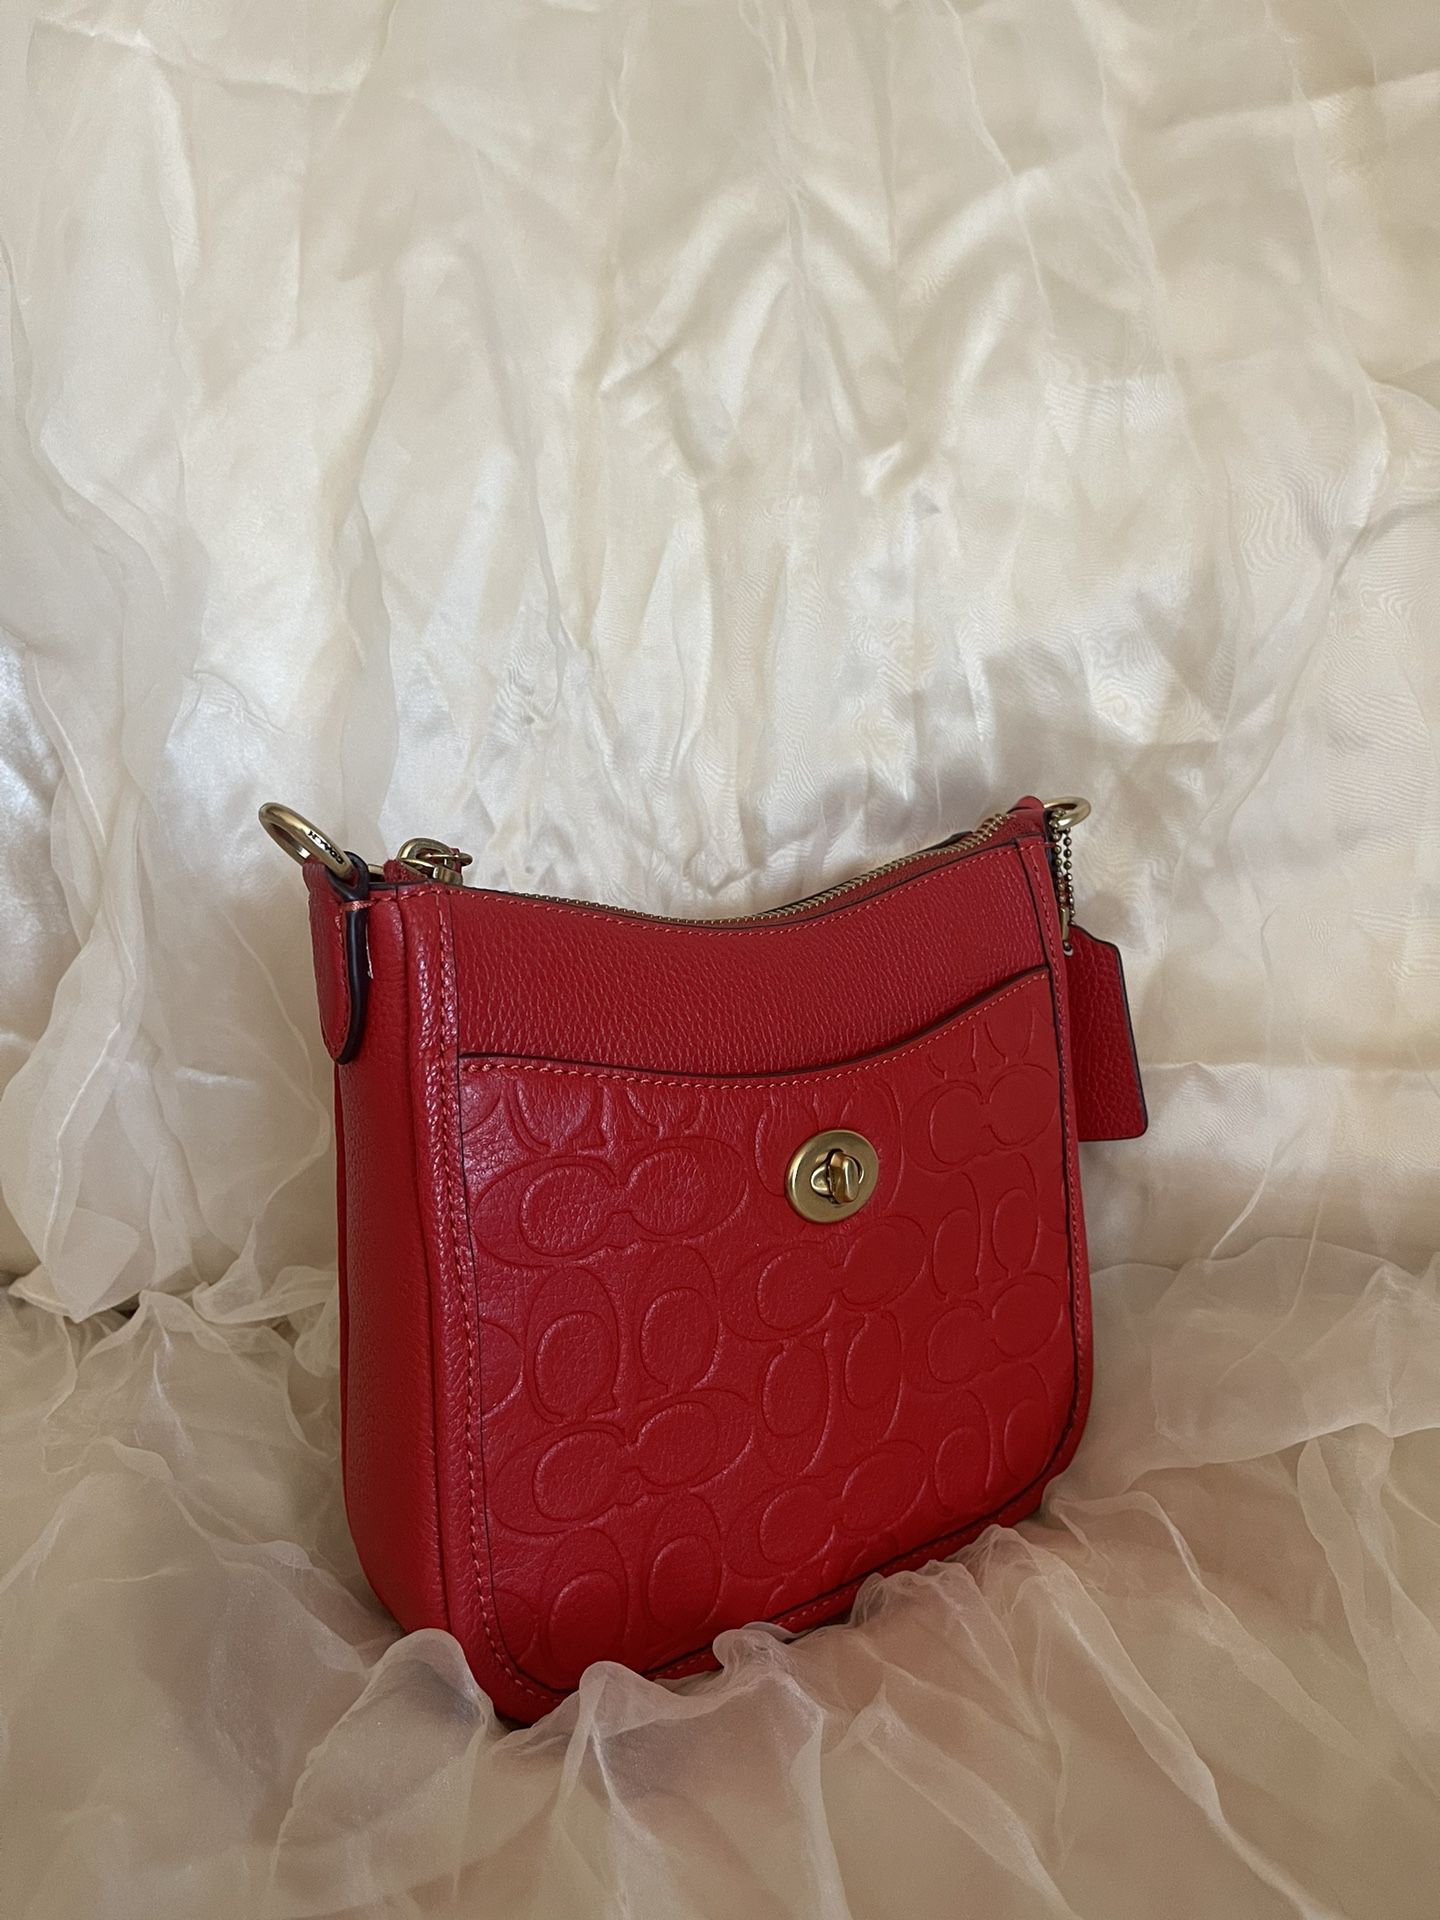 Coach Embossed Signature Leather Chaise Crossbody (Red)